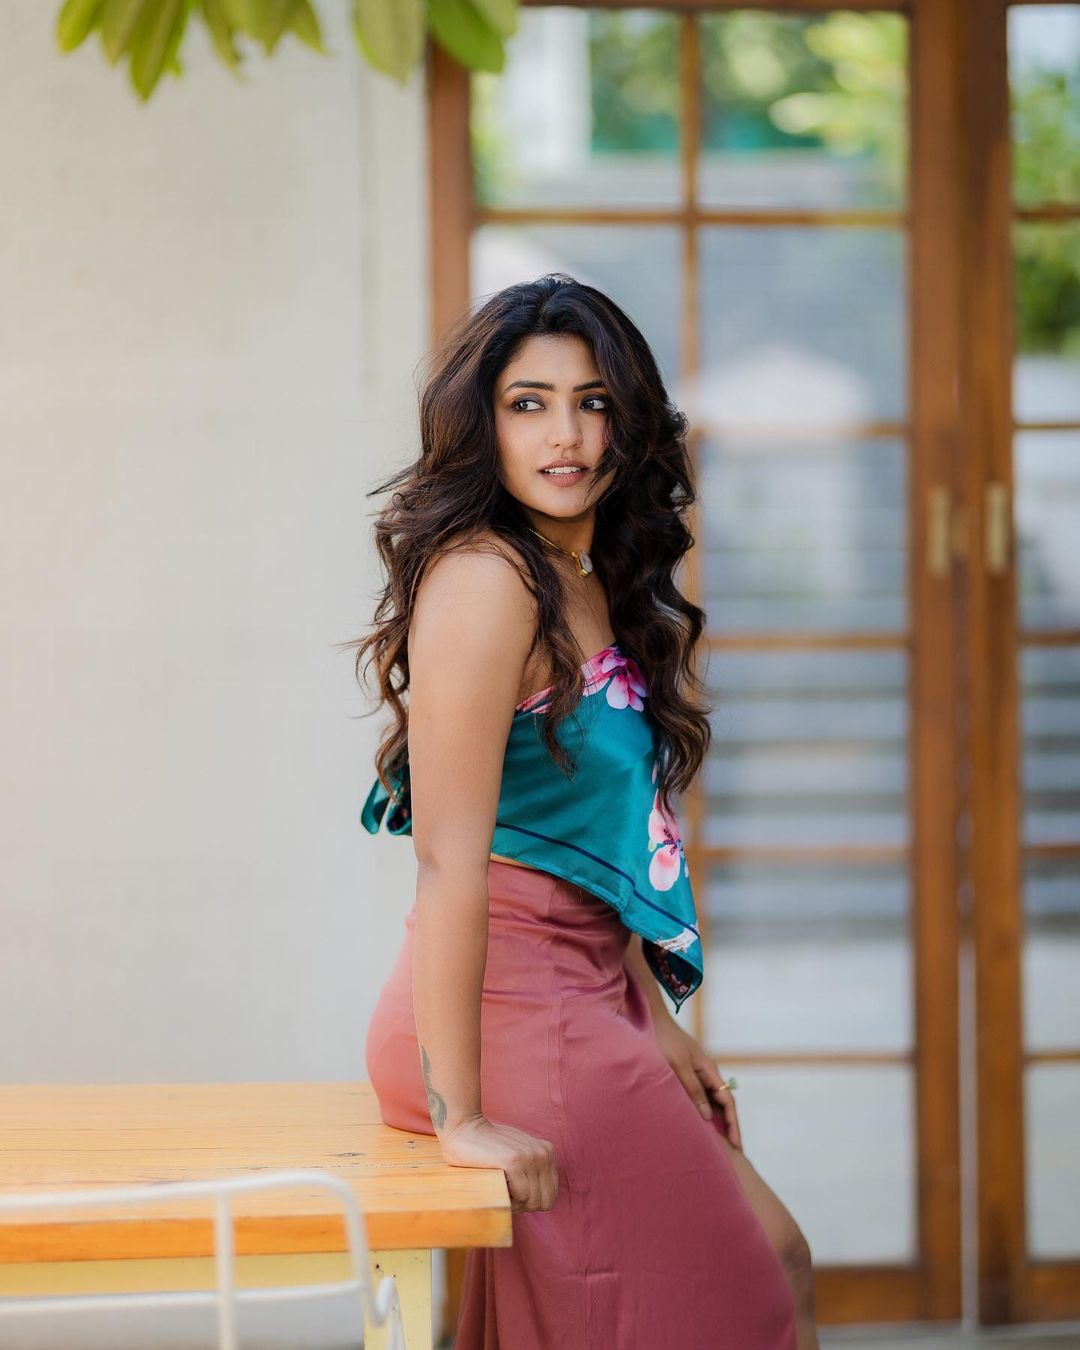 Actress eesha rebba looks pretty and amazing in this clicks-Eesharebba, Eesha Rebba Hot, Eesha Rebba Photos,Spicy Hot Pics,Images,High Resolution WallPapers Download